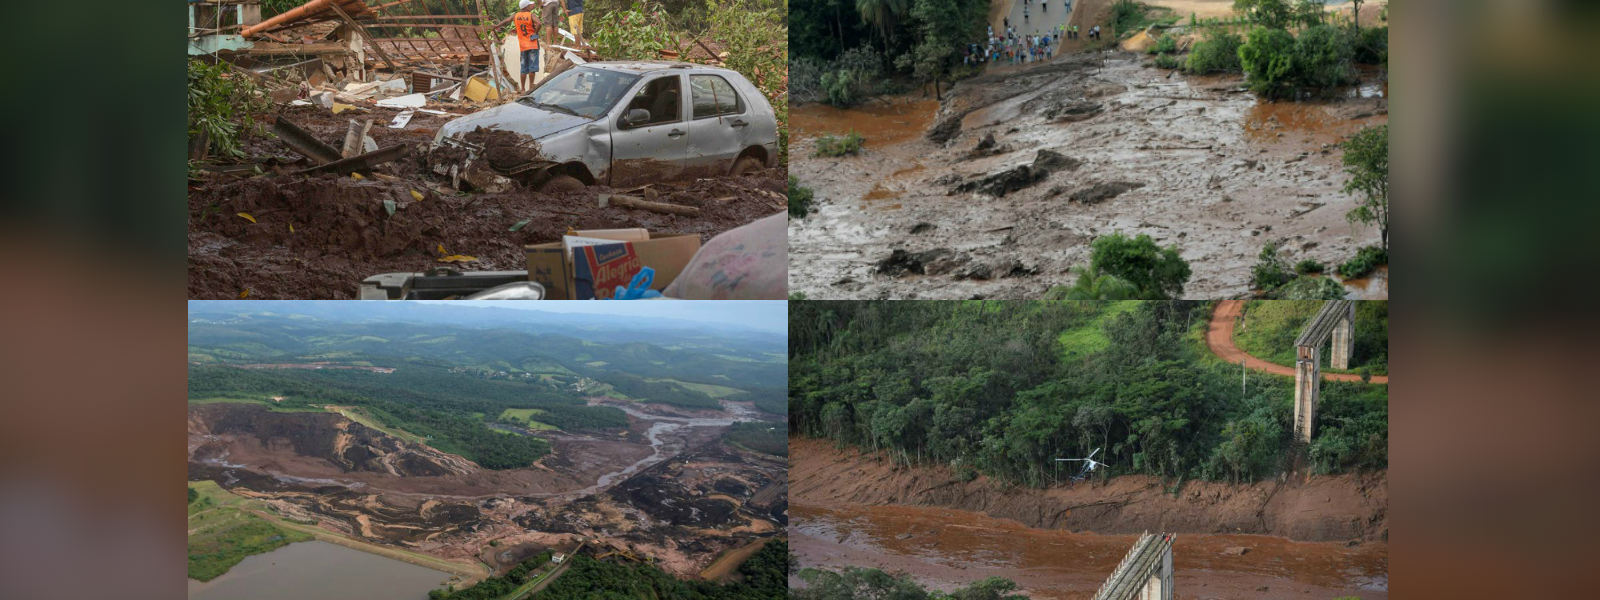 Death toll in Brazil dam disaster hits 58